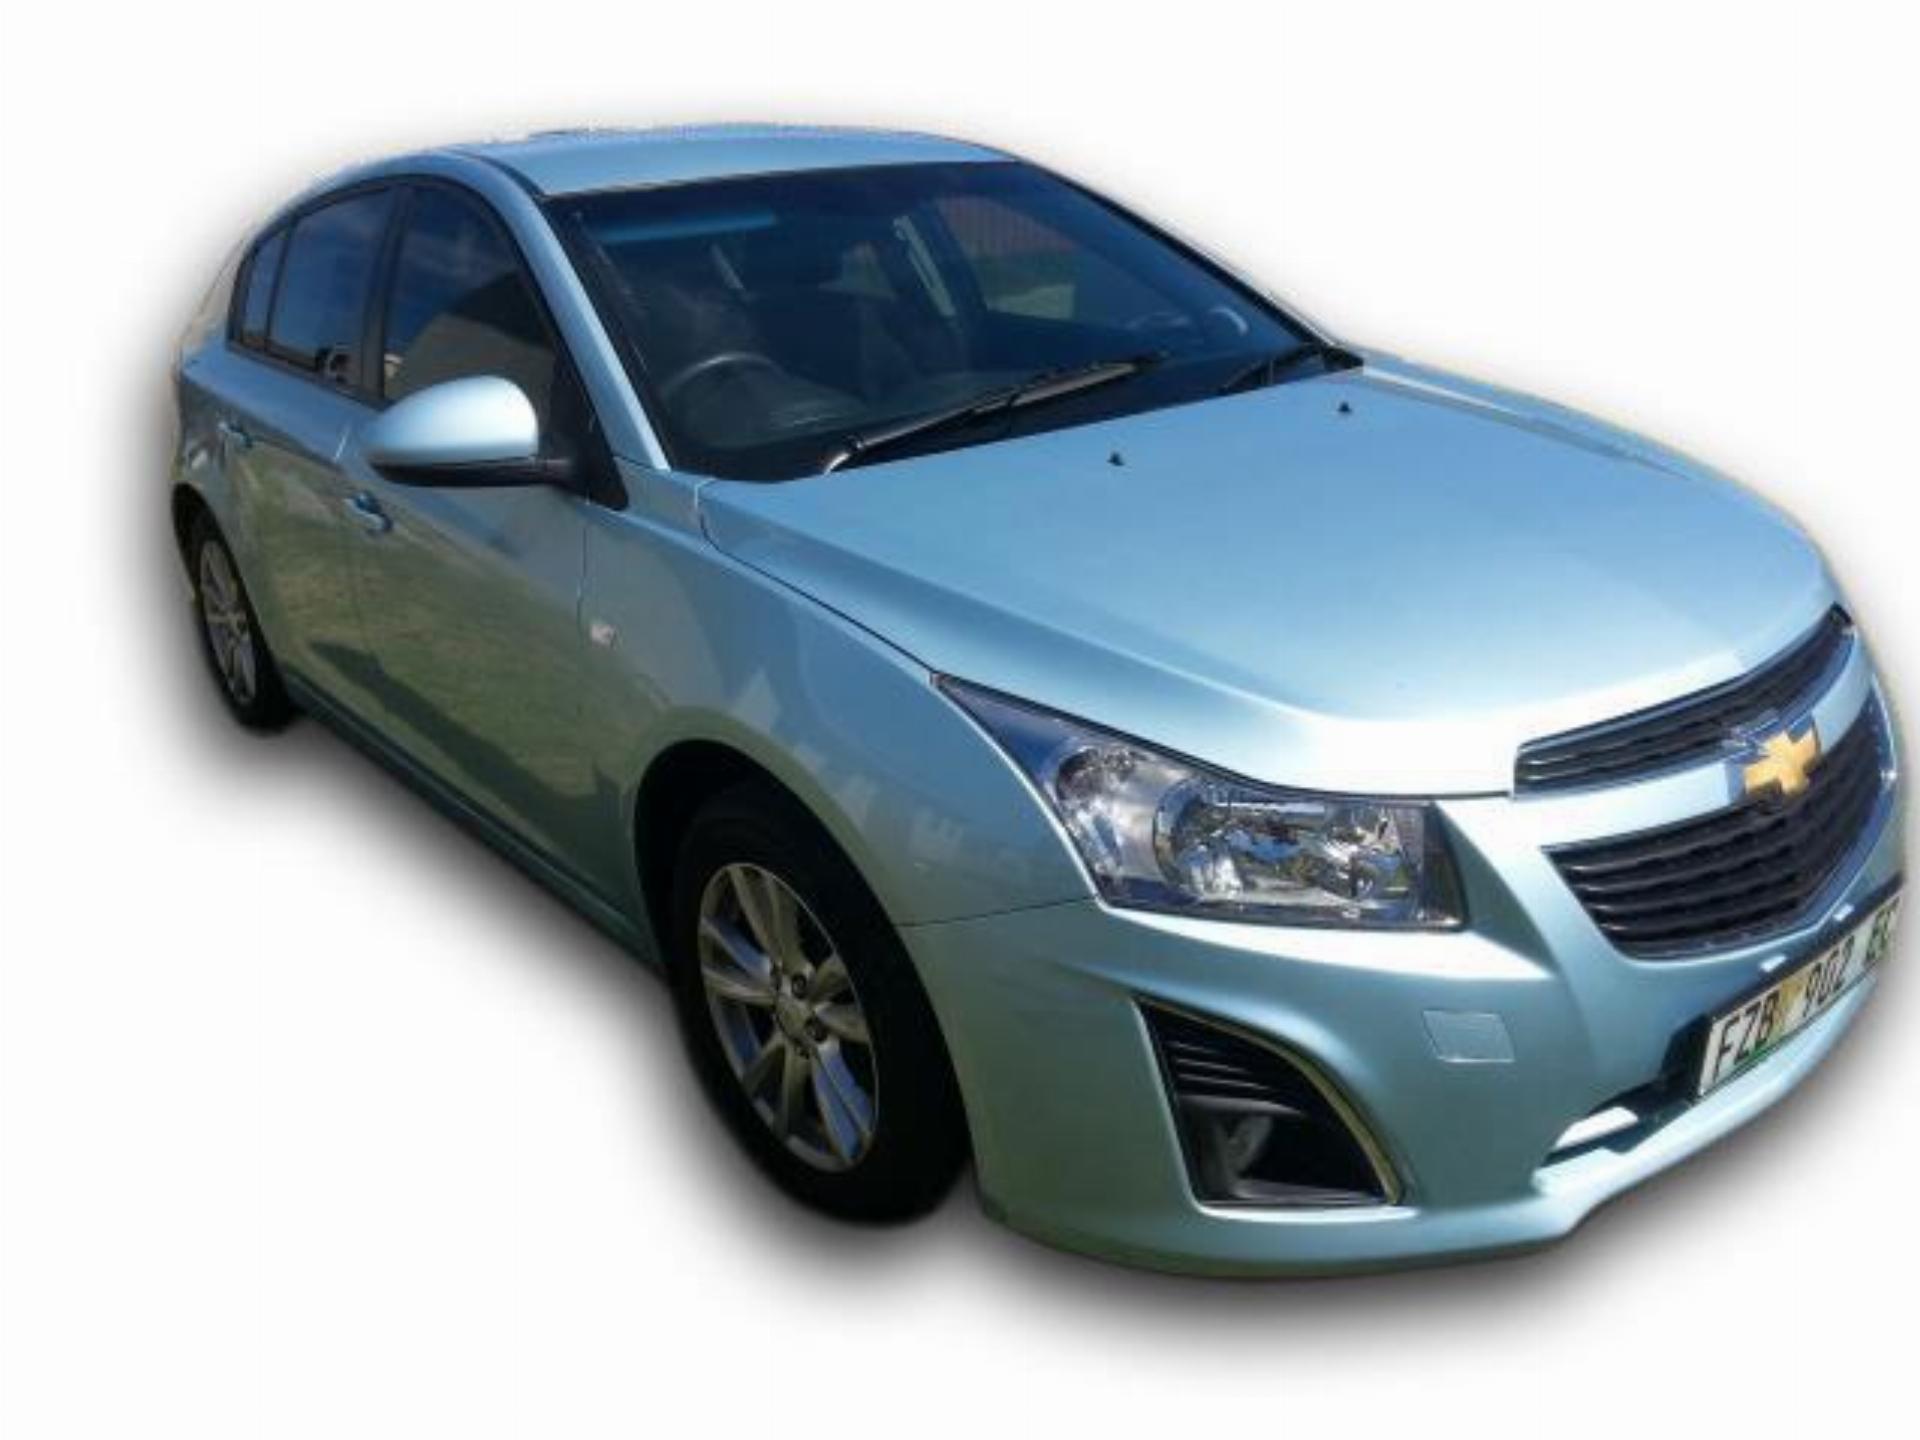 Used Chevrolet Cruze 1.8 LS 2013 on auction PV1005113